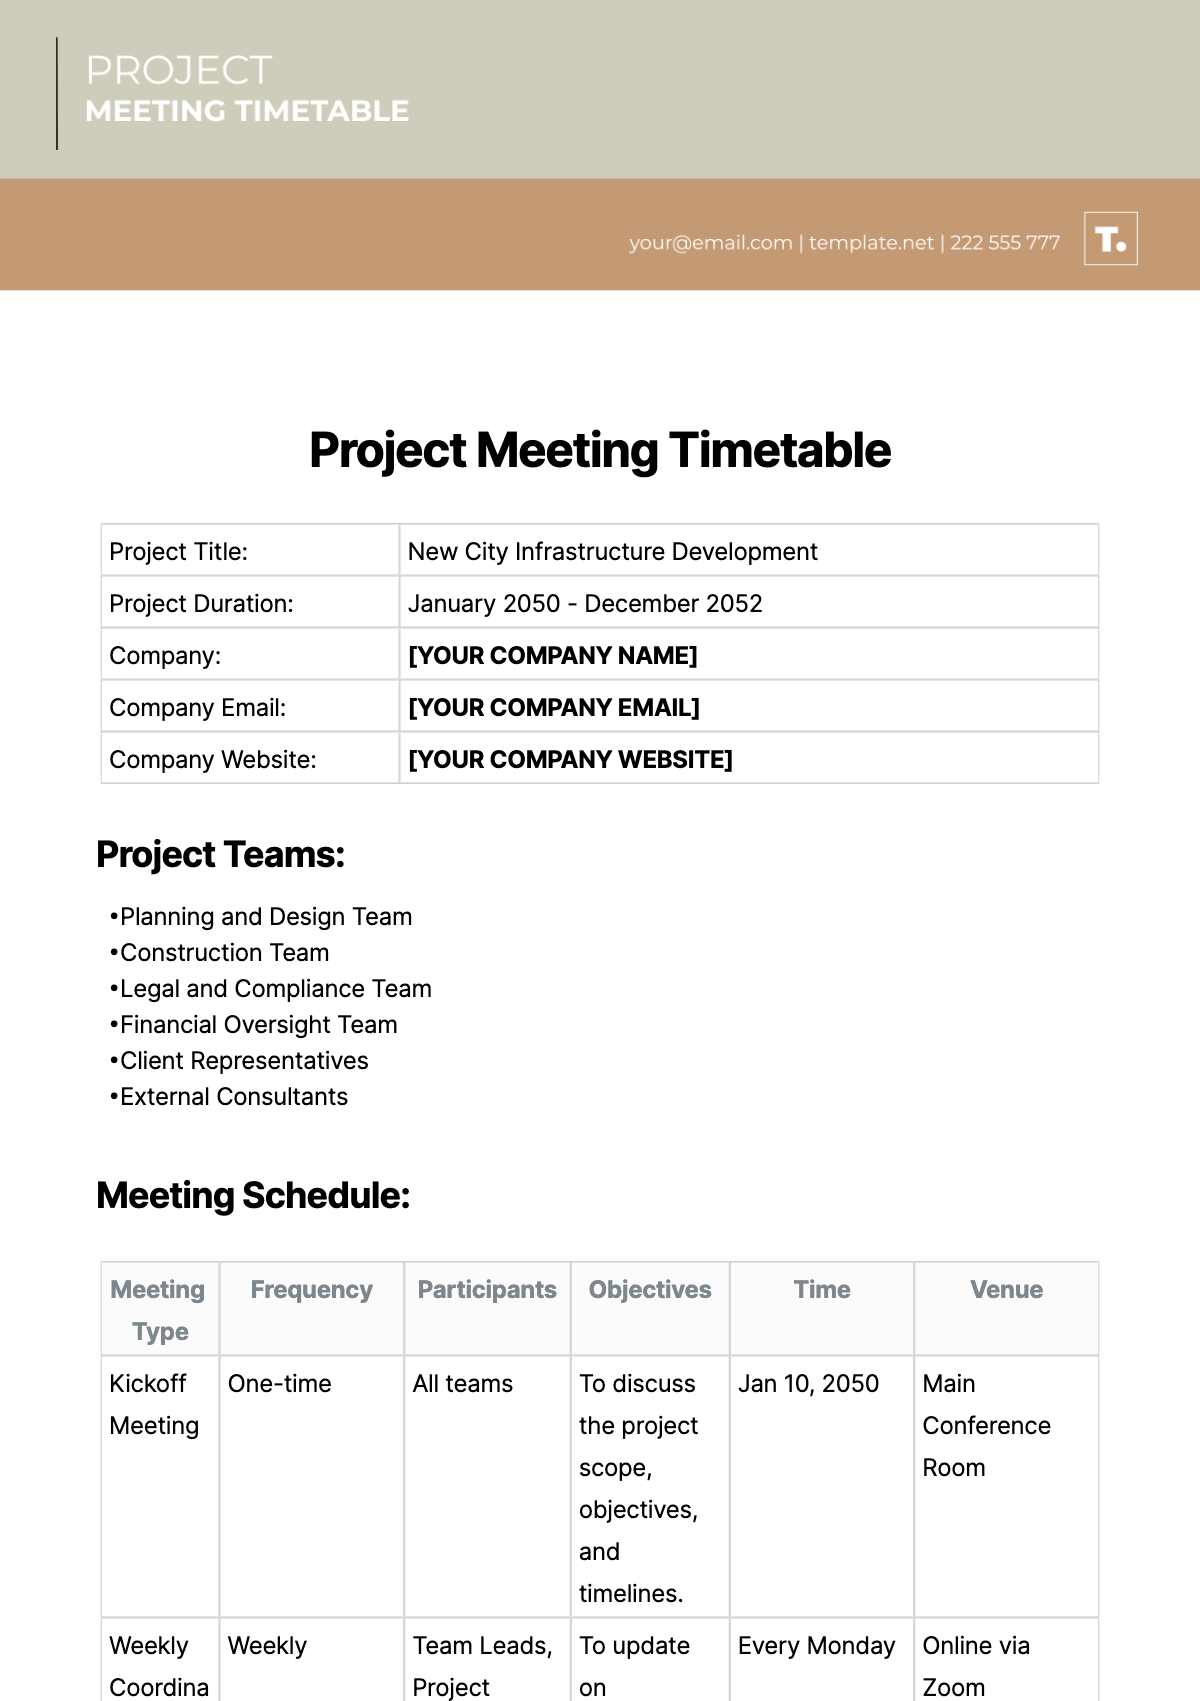 Project Meeting Timetable Template